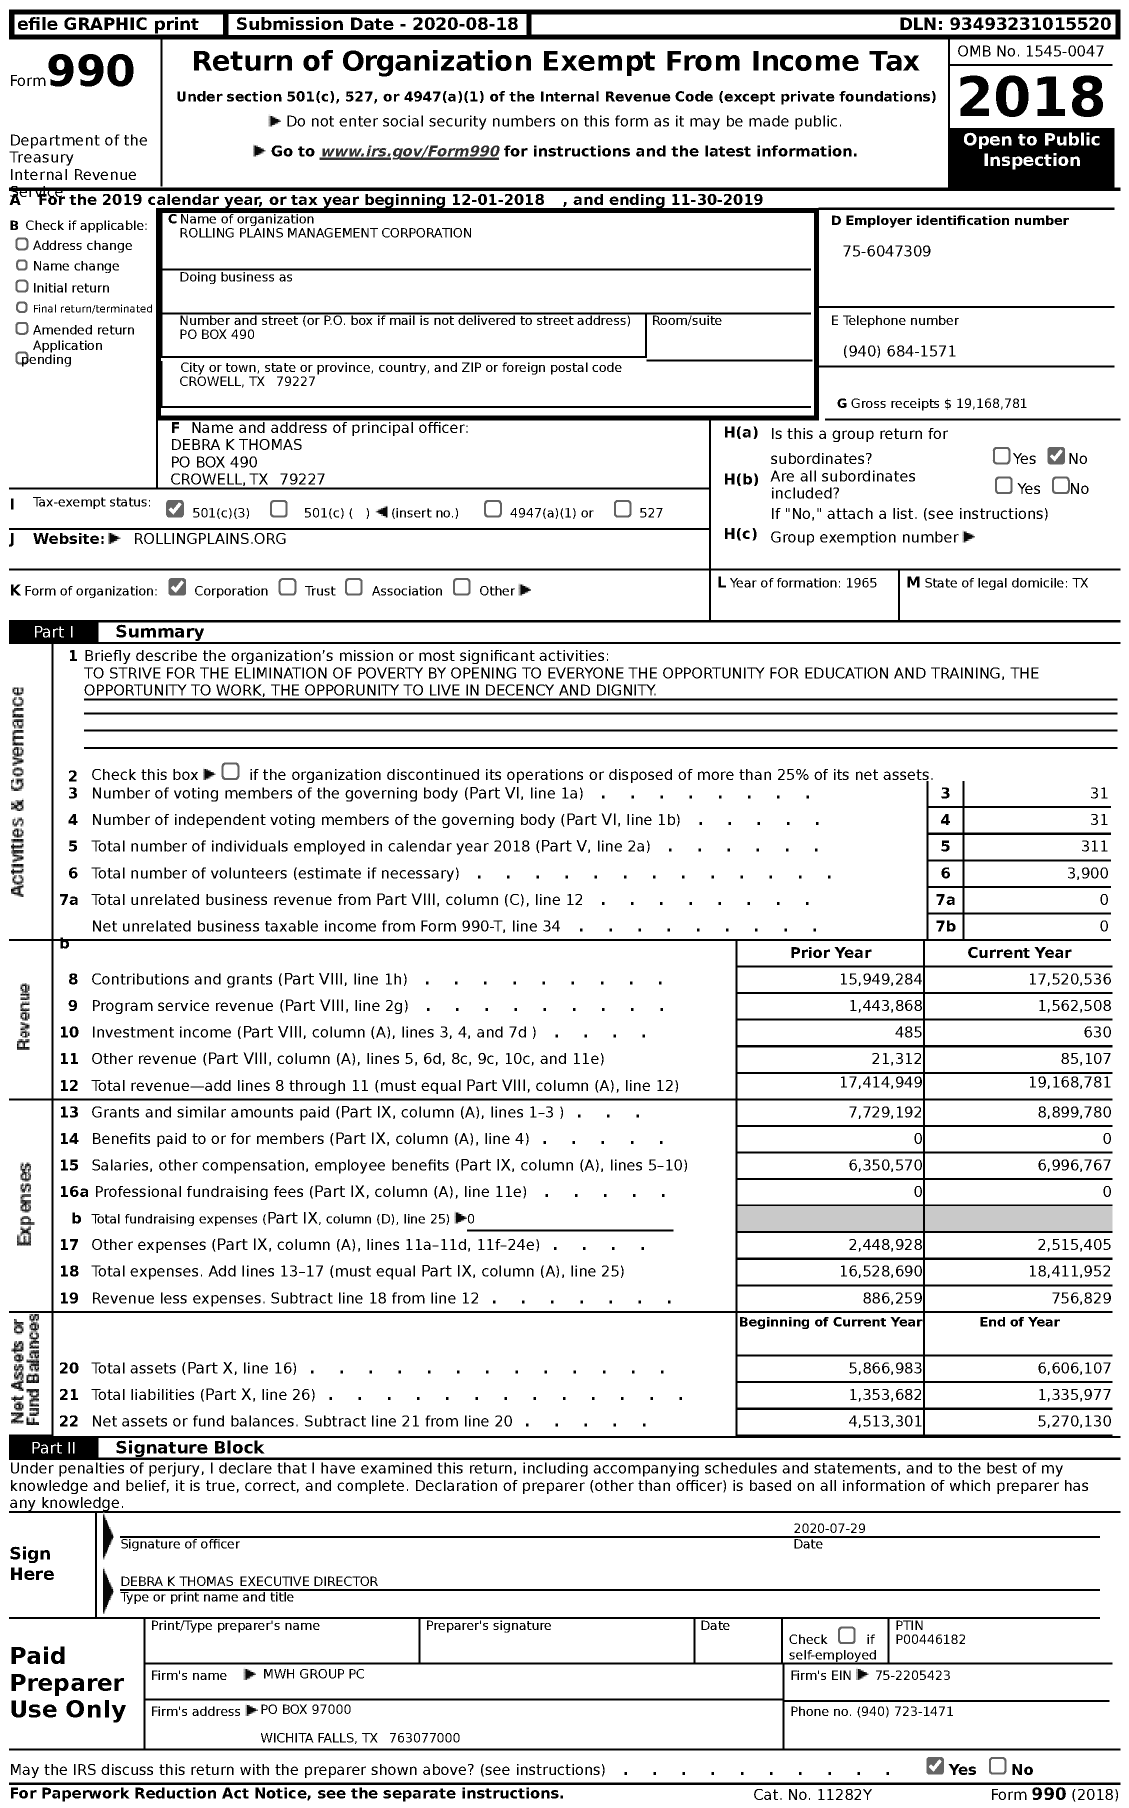 Image of first page of 2018 Form 990 for Rolling Plains Management Corporation